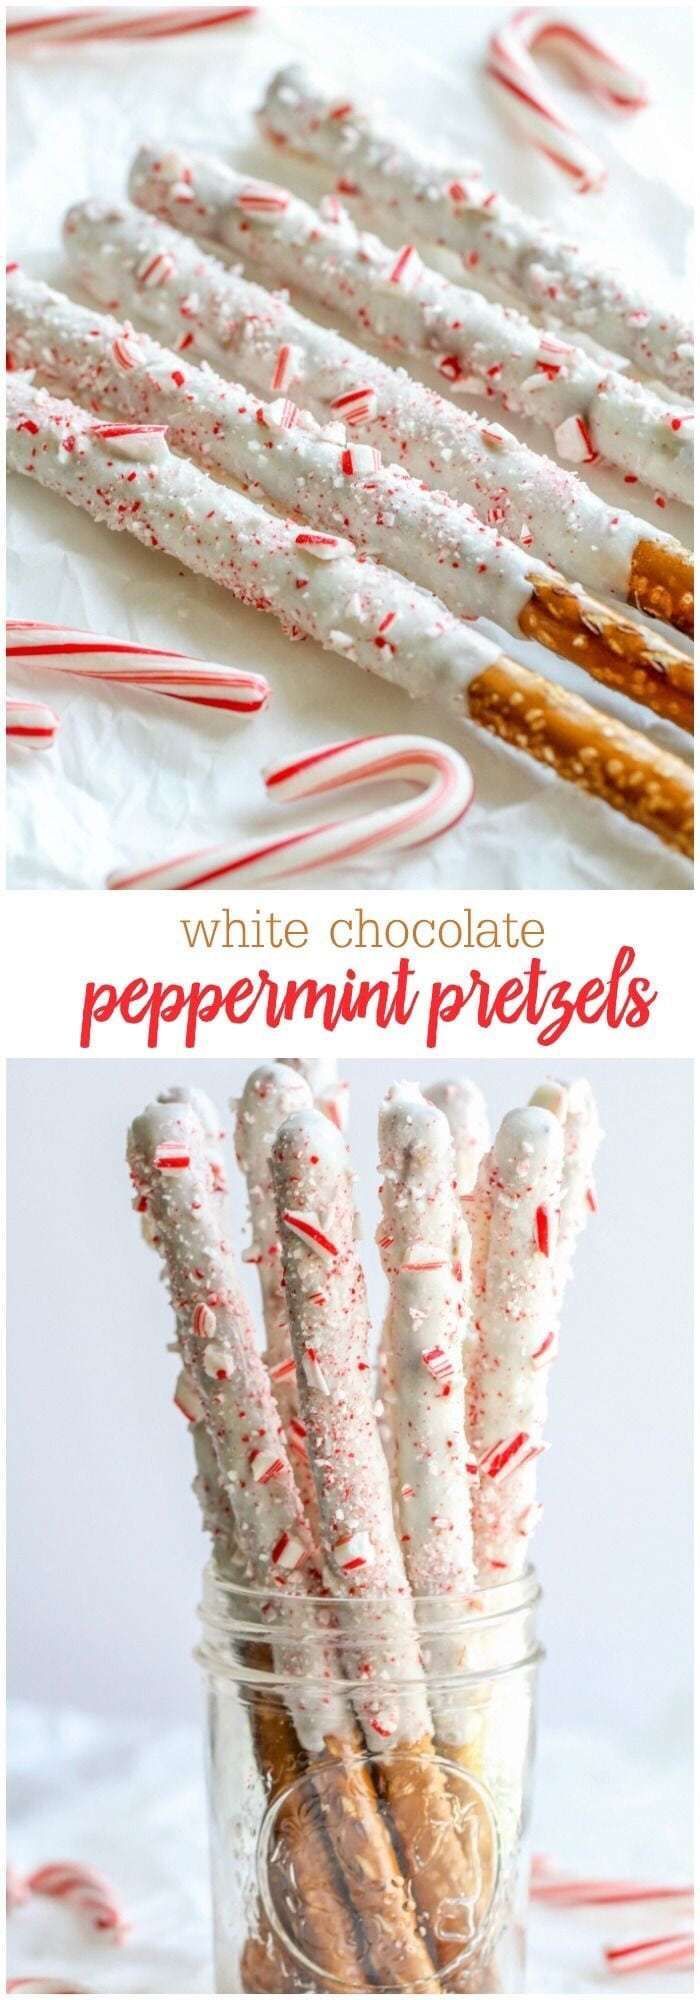 White Chocolate Peppermint Pretzels -   15 holiday Hacks food ideas